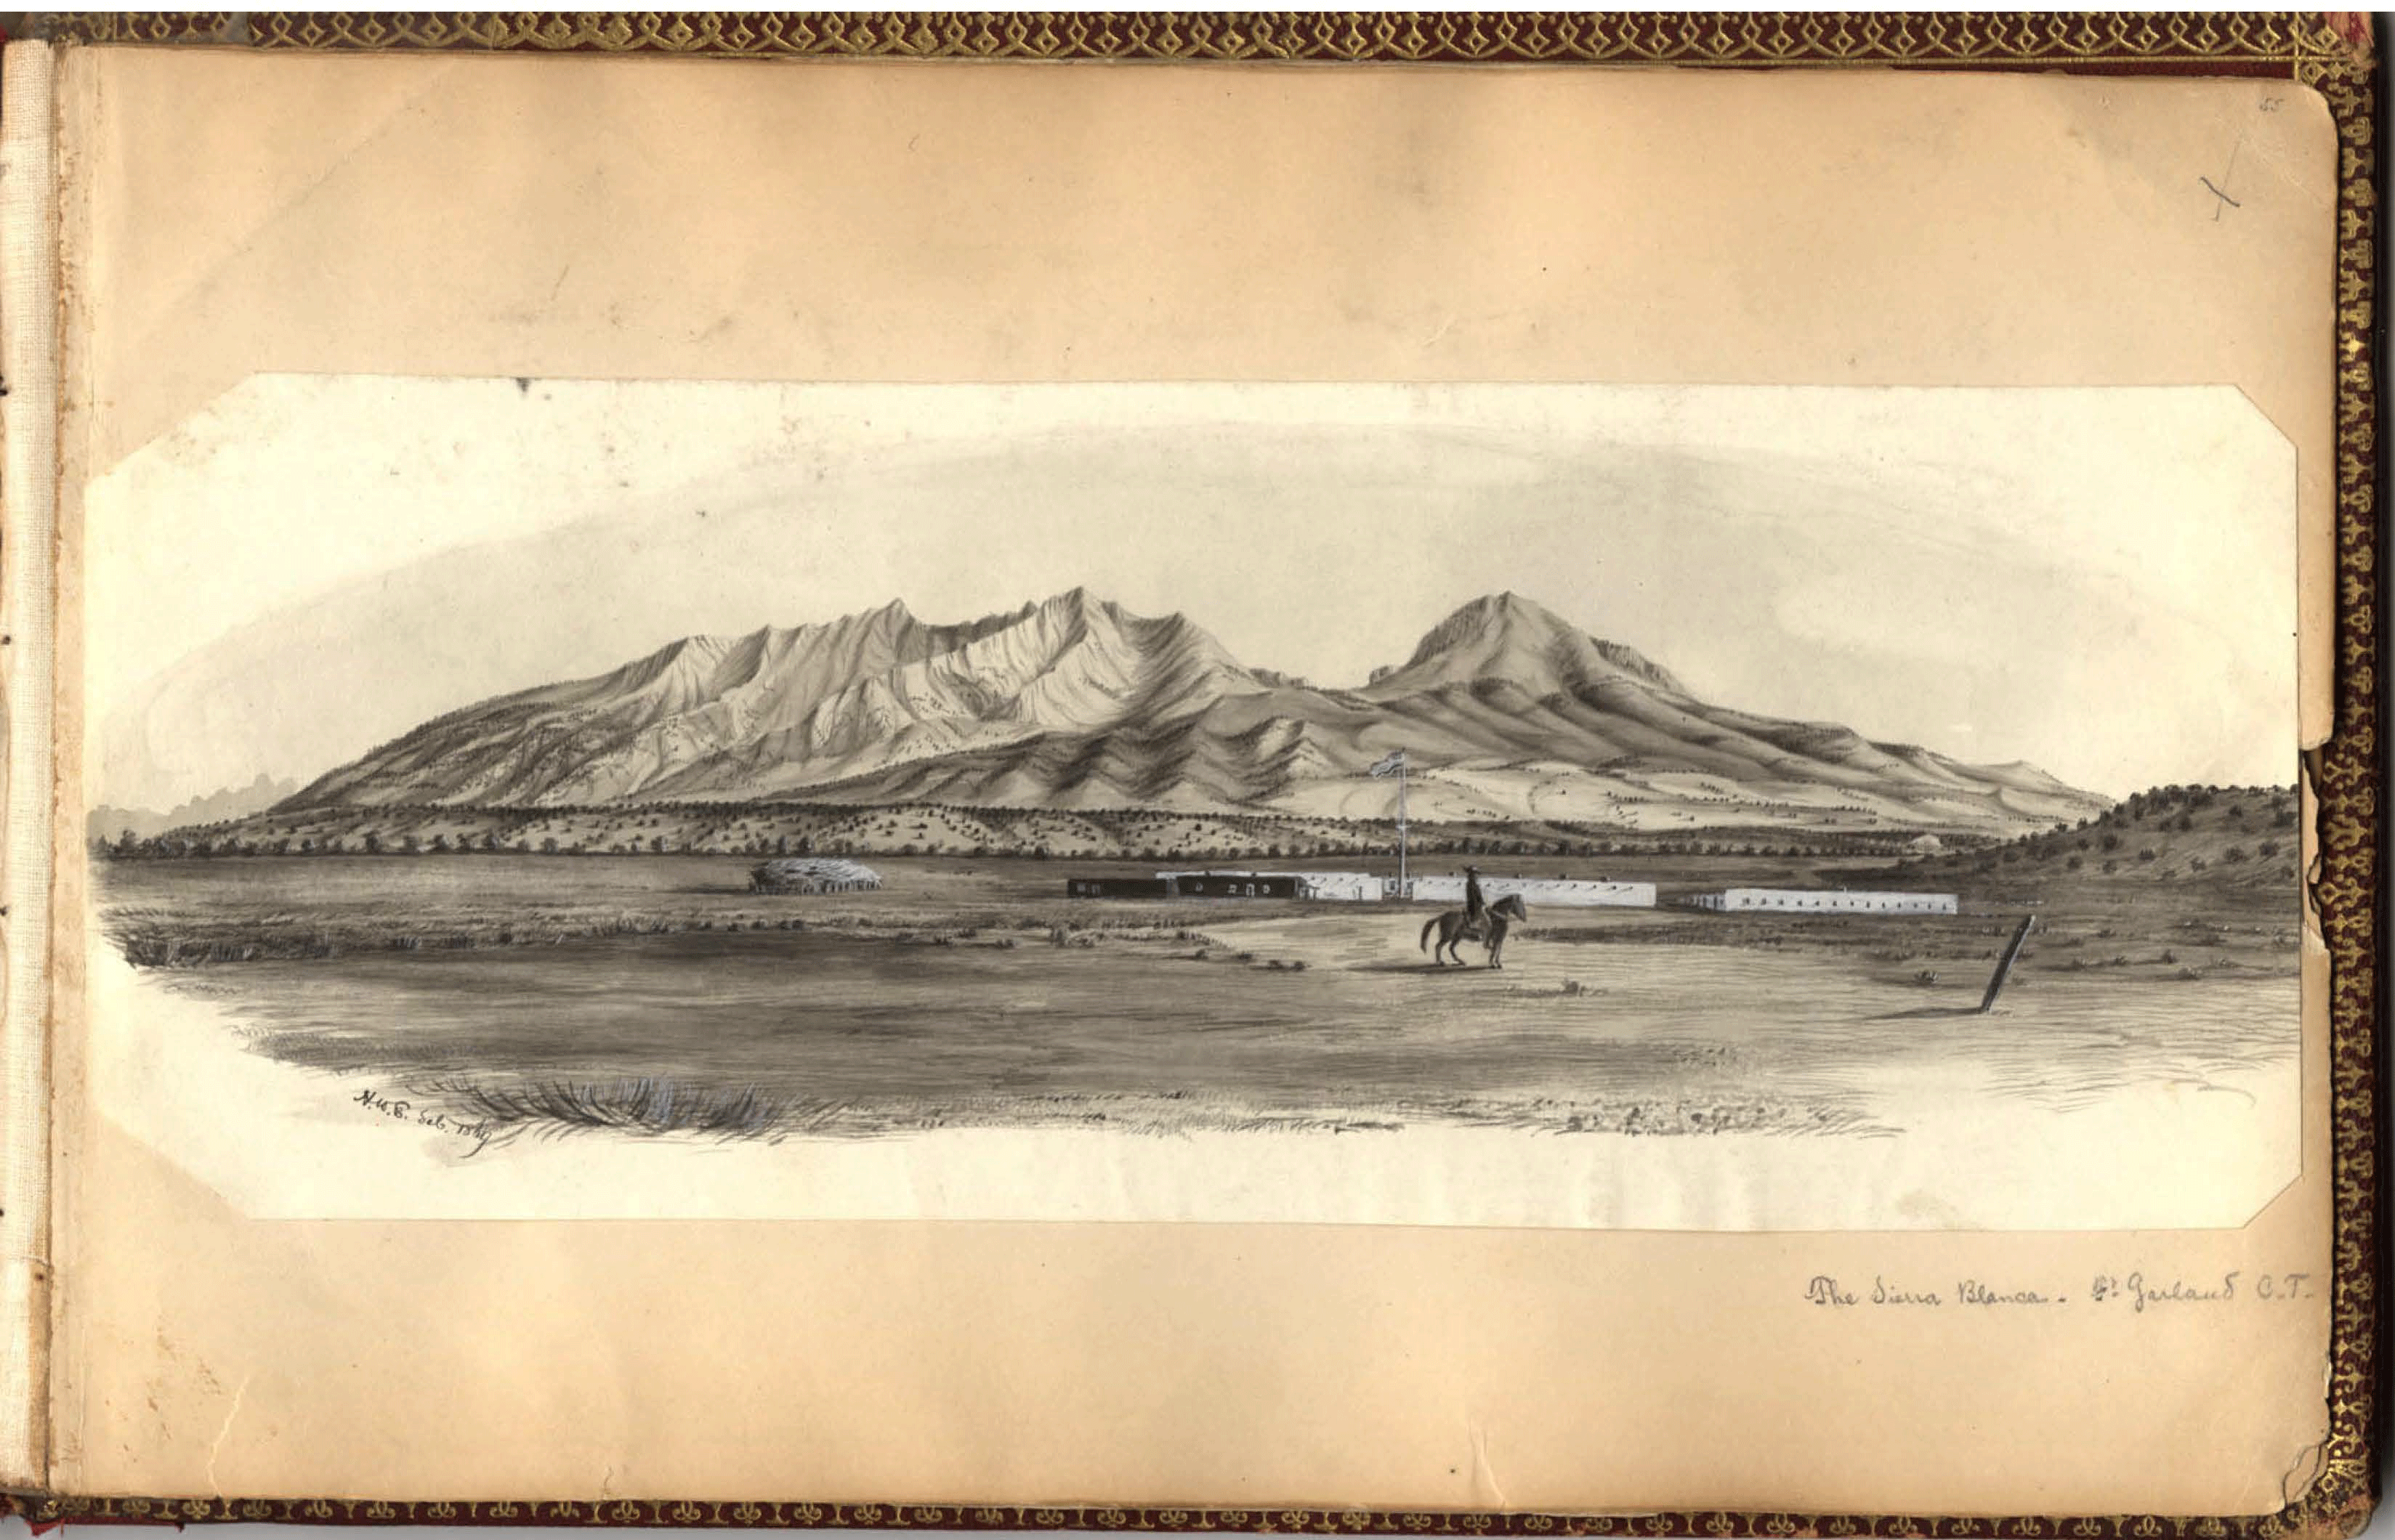 Drawing of Fort Garland by Henry W. Elliot 1869